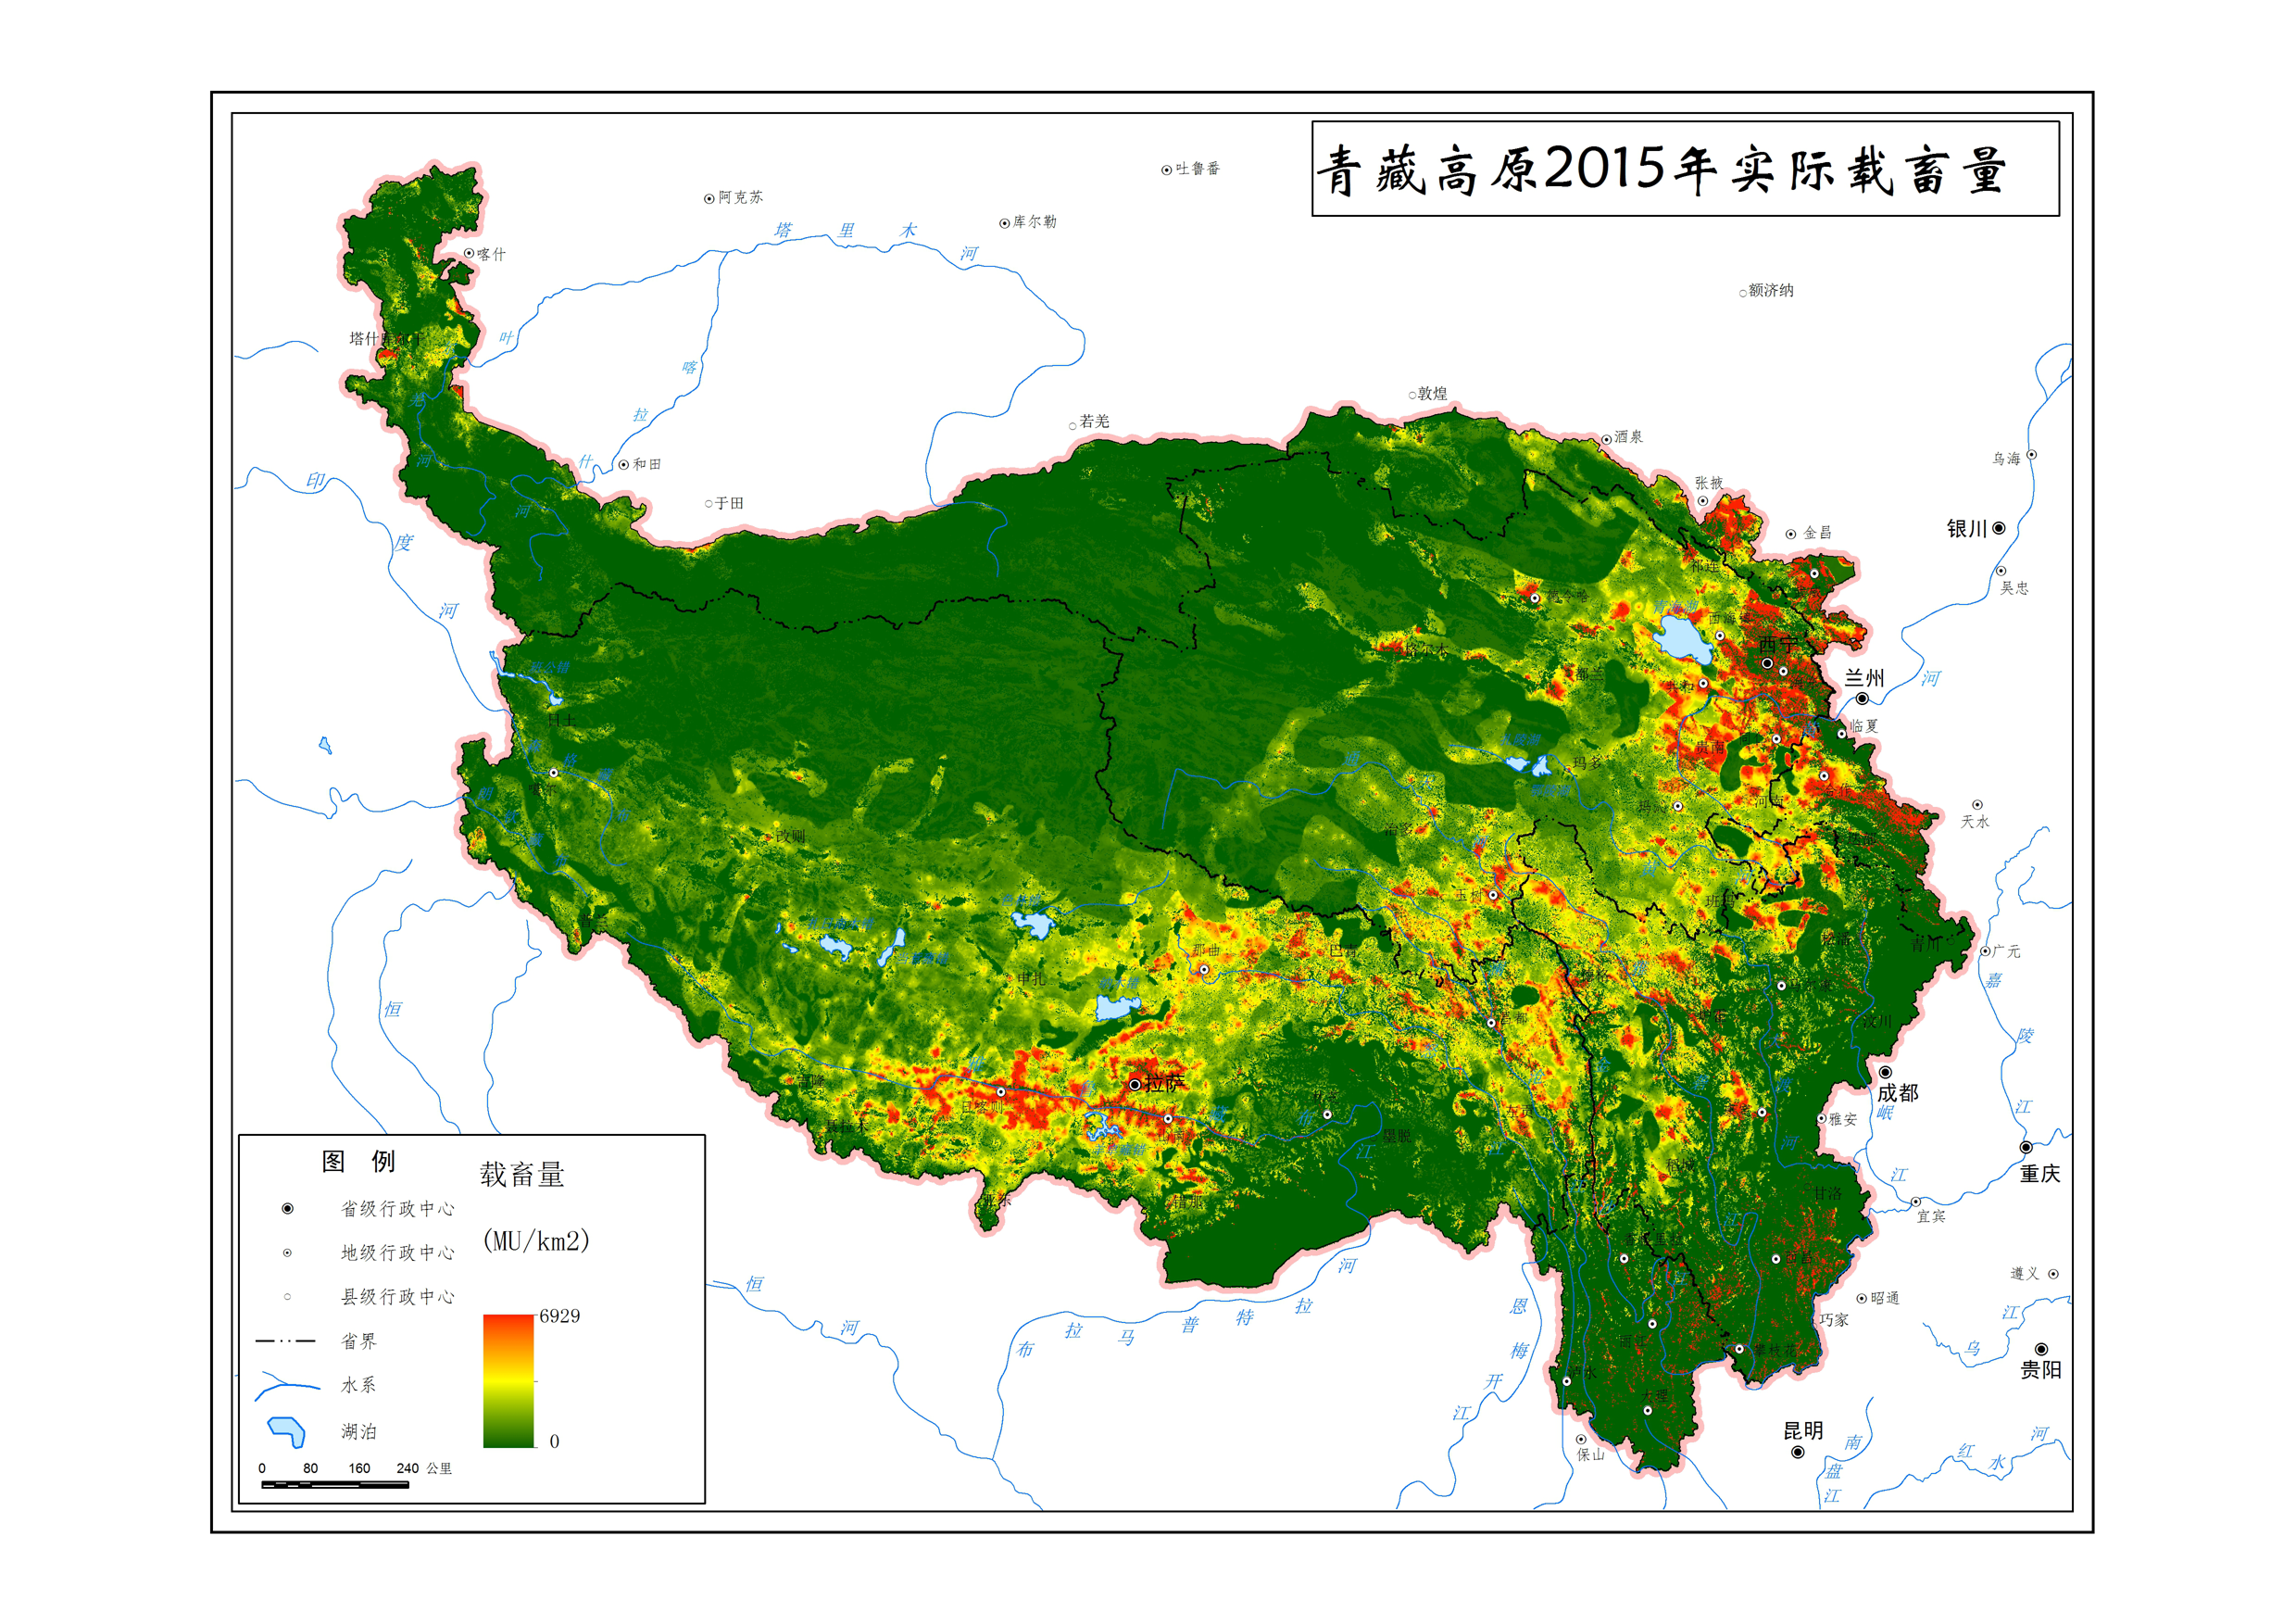 Actual livestock carrying capacity estimation product in Qinghai-Tibet Plateau (2000-2019)